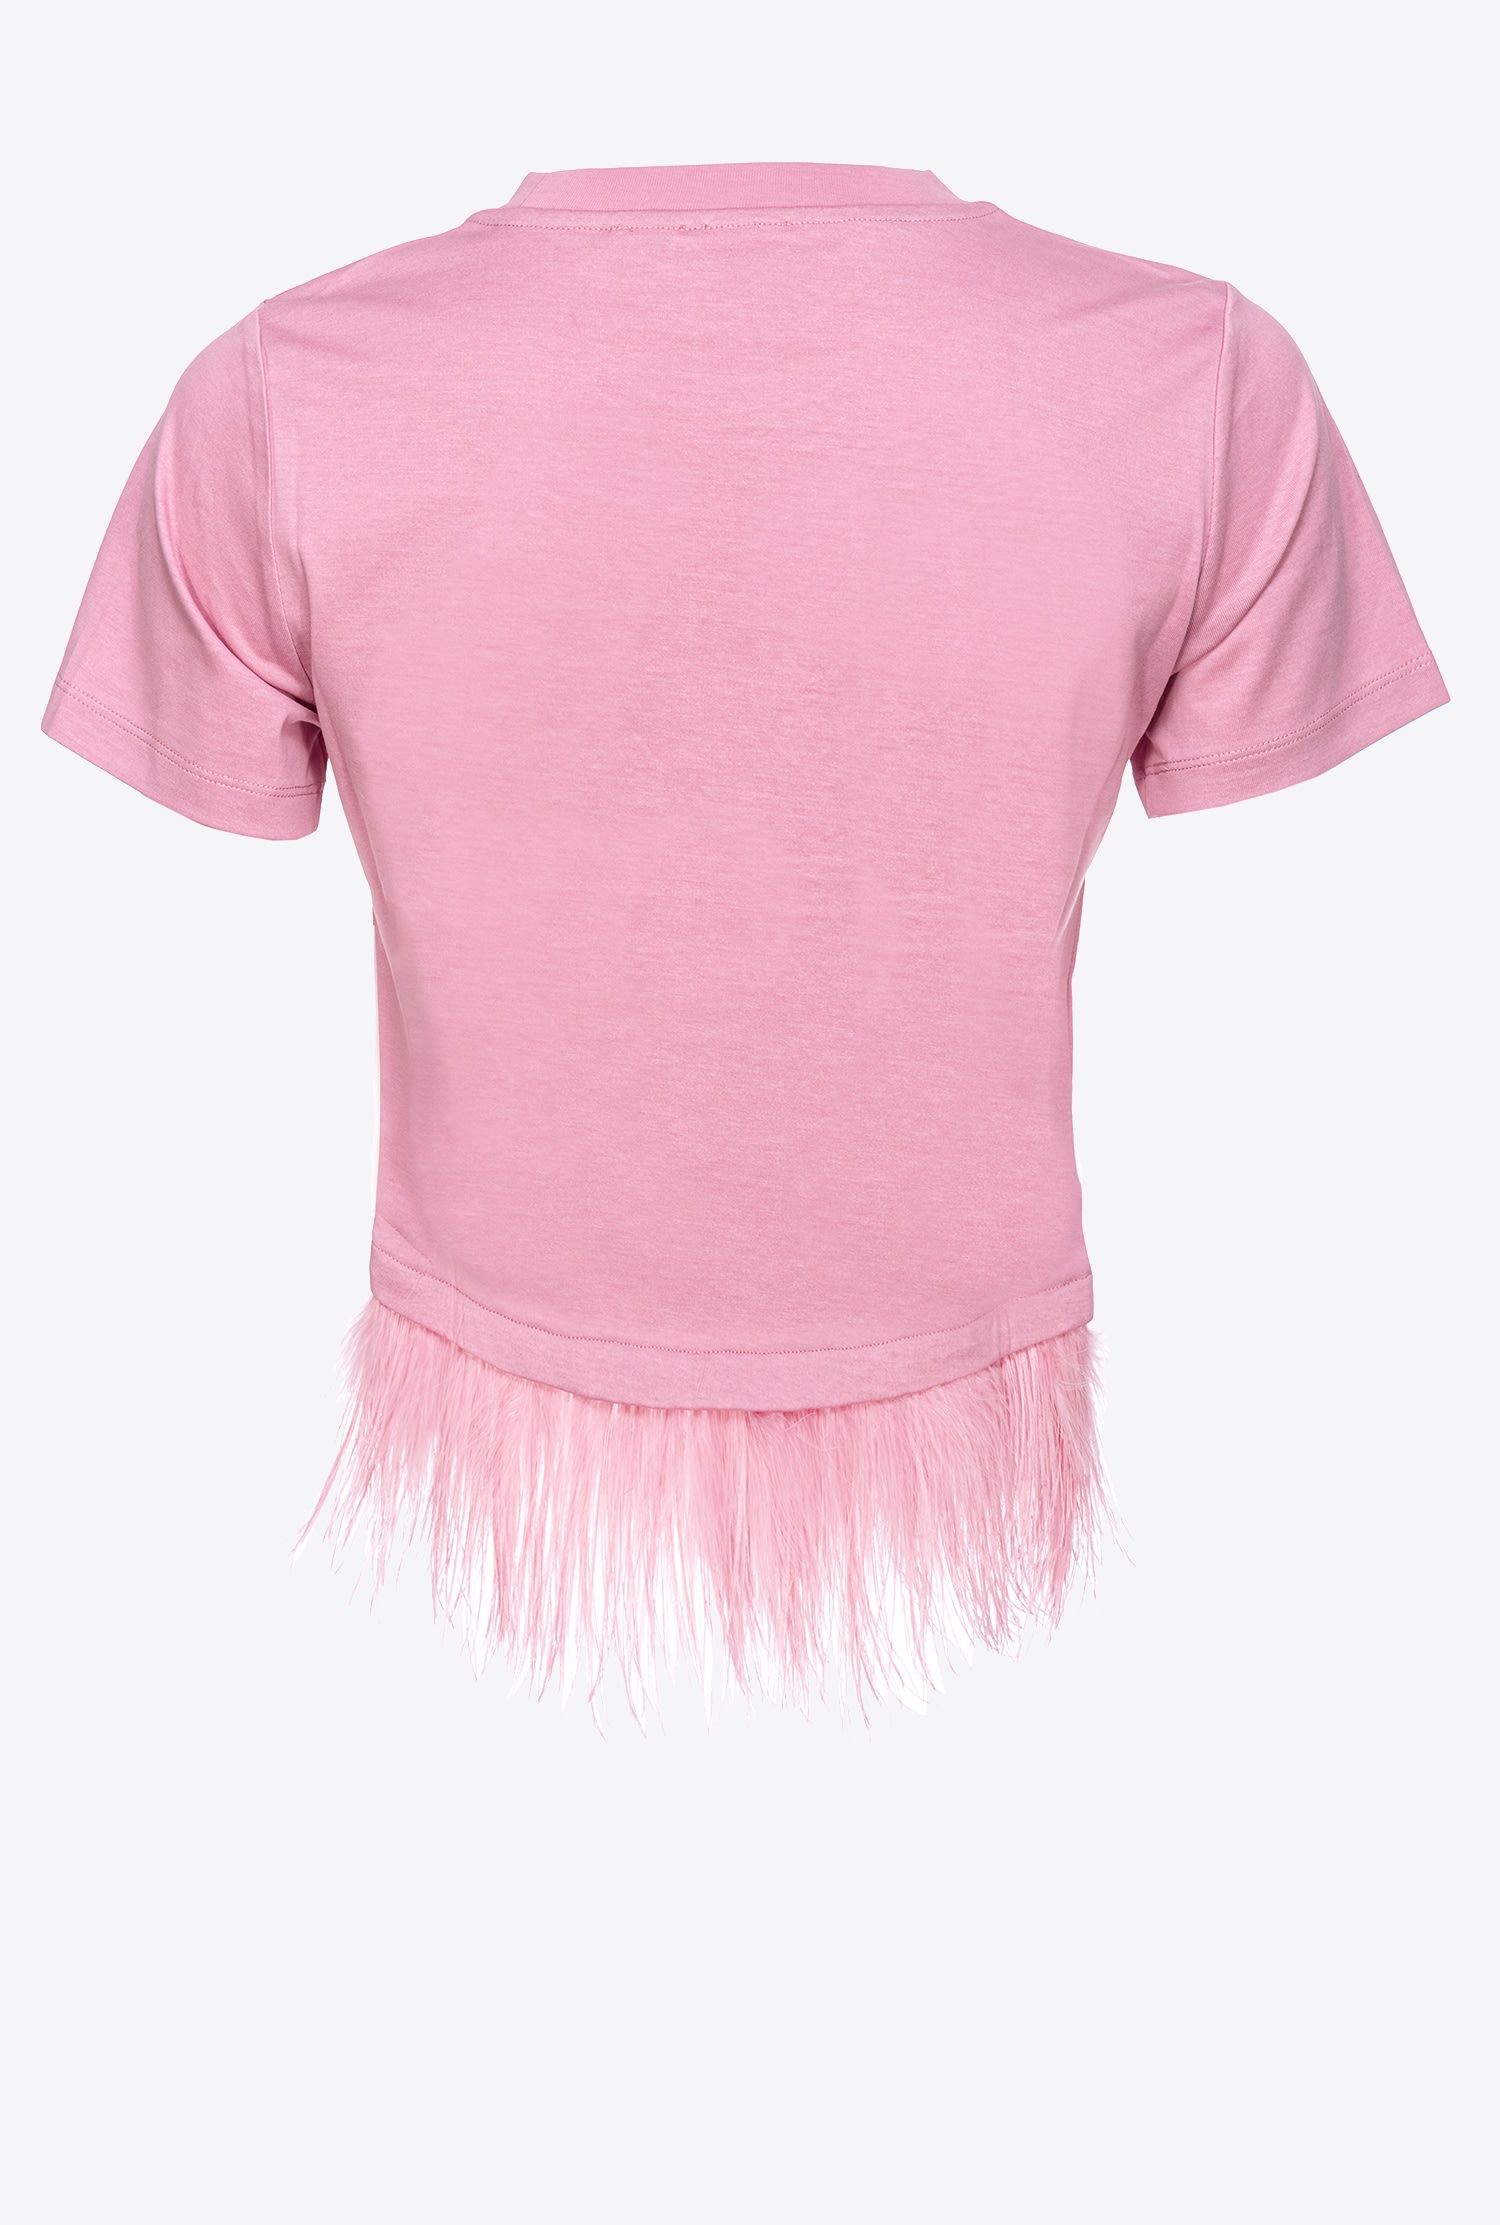 PINKO CITIES T-SHIRT WITH FEATHERS - 5